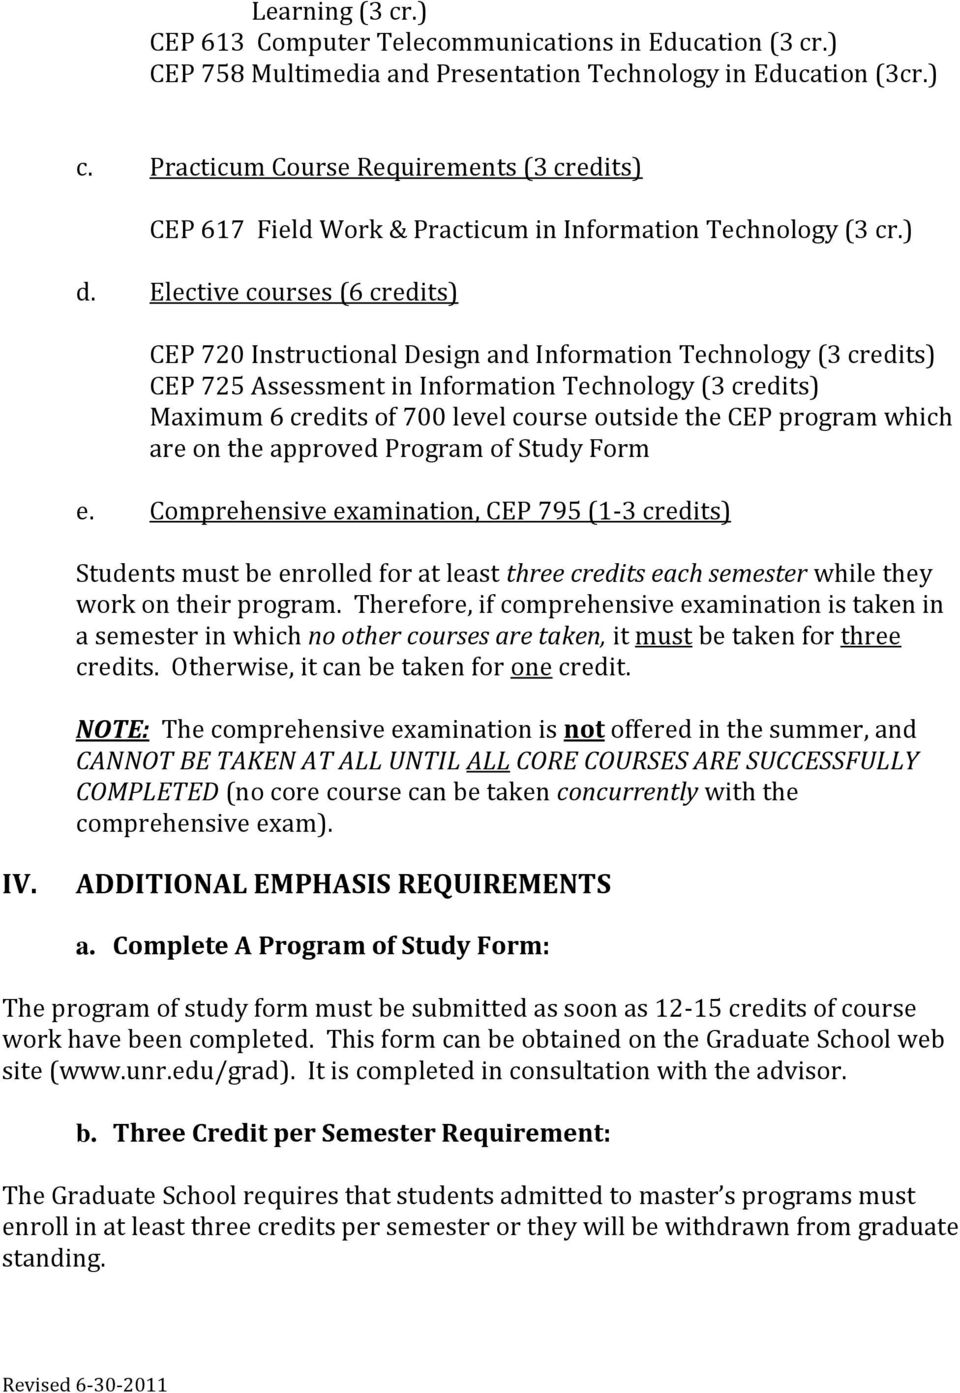 Elective courses (6 credits) CEP 720 Instructional Design and Information Technology (3 credits) CEP 725 Assessment in Information Technology (3 credits) Maximum 6 credits of 700 level course outside